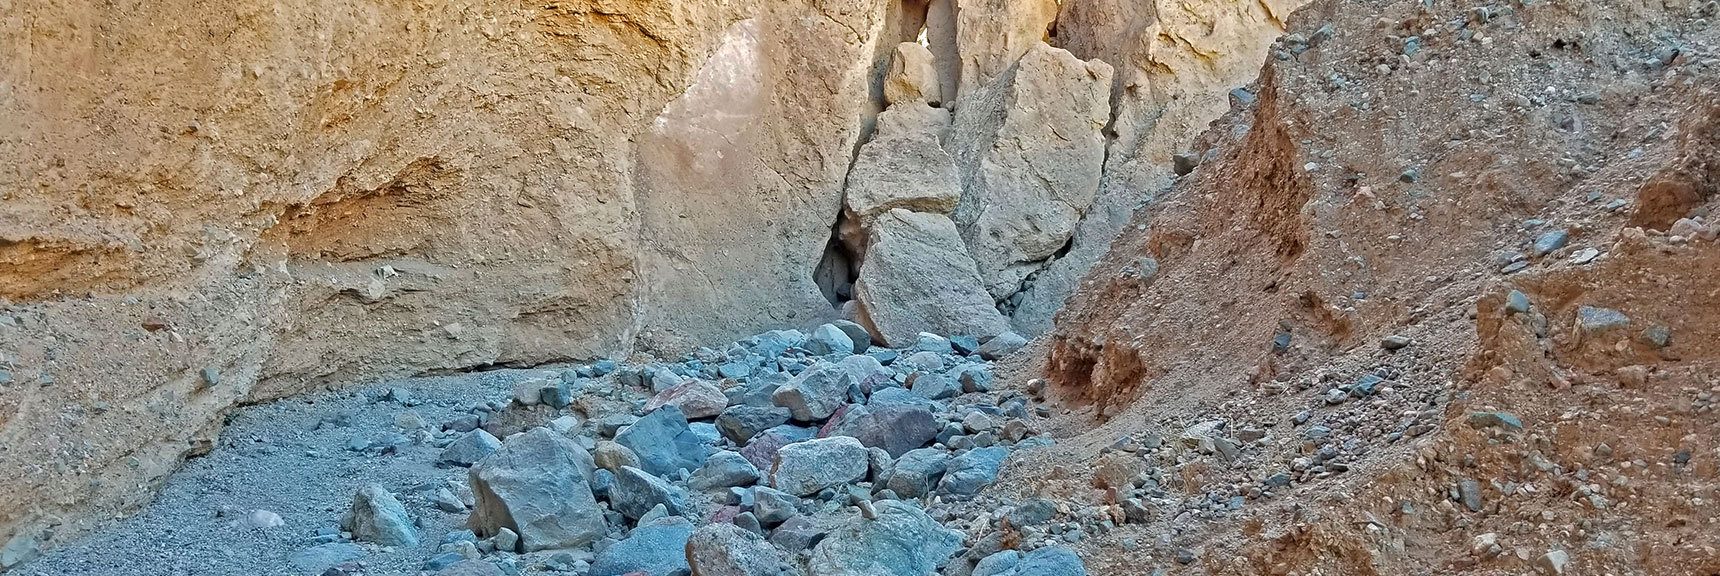 Approaching Crawl Space to the First Slot | Sidewinder Canyon | Death Valley National Park, California